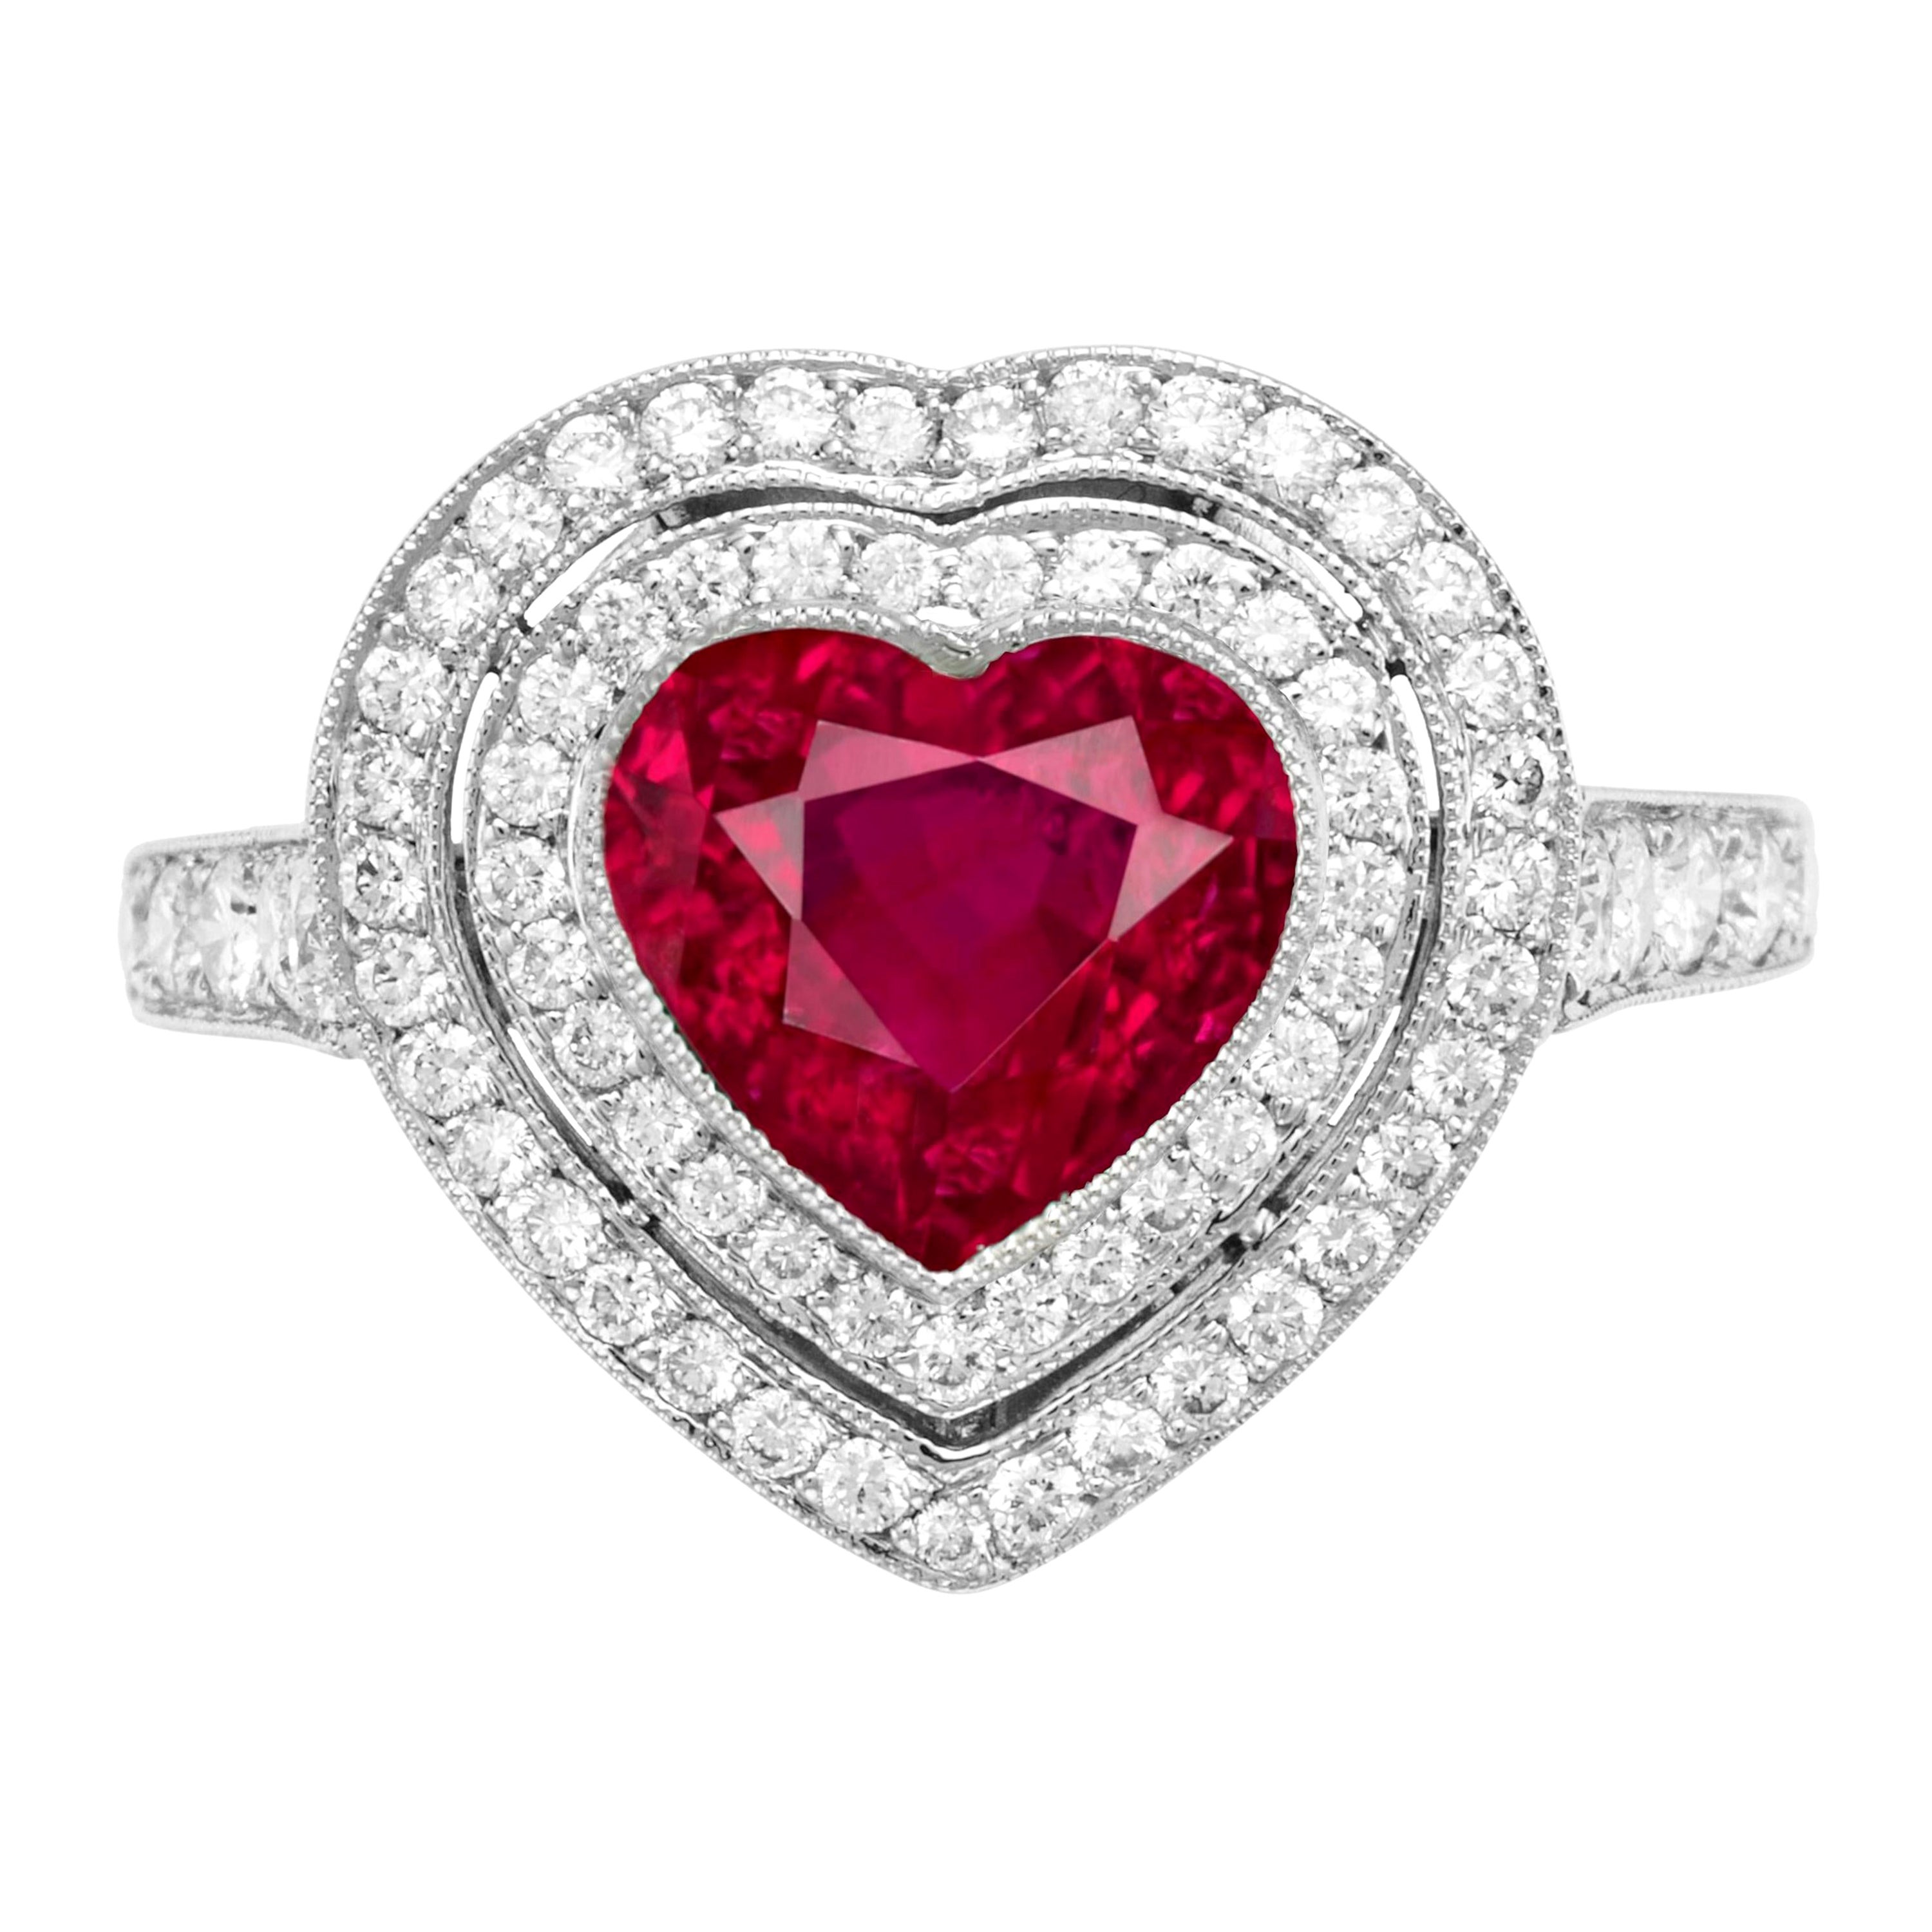 GIA GRS Certified 3 Carat Heart Shape Vivid Red Ruby Diamond Ring For Sale